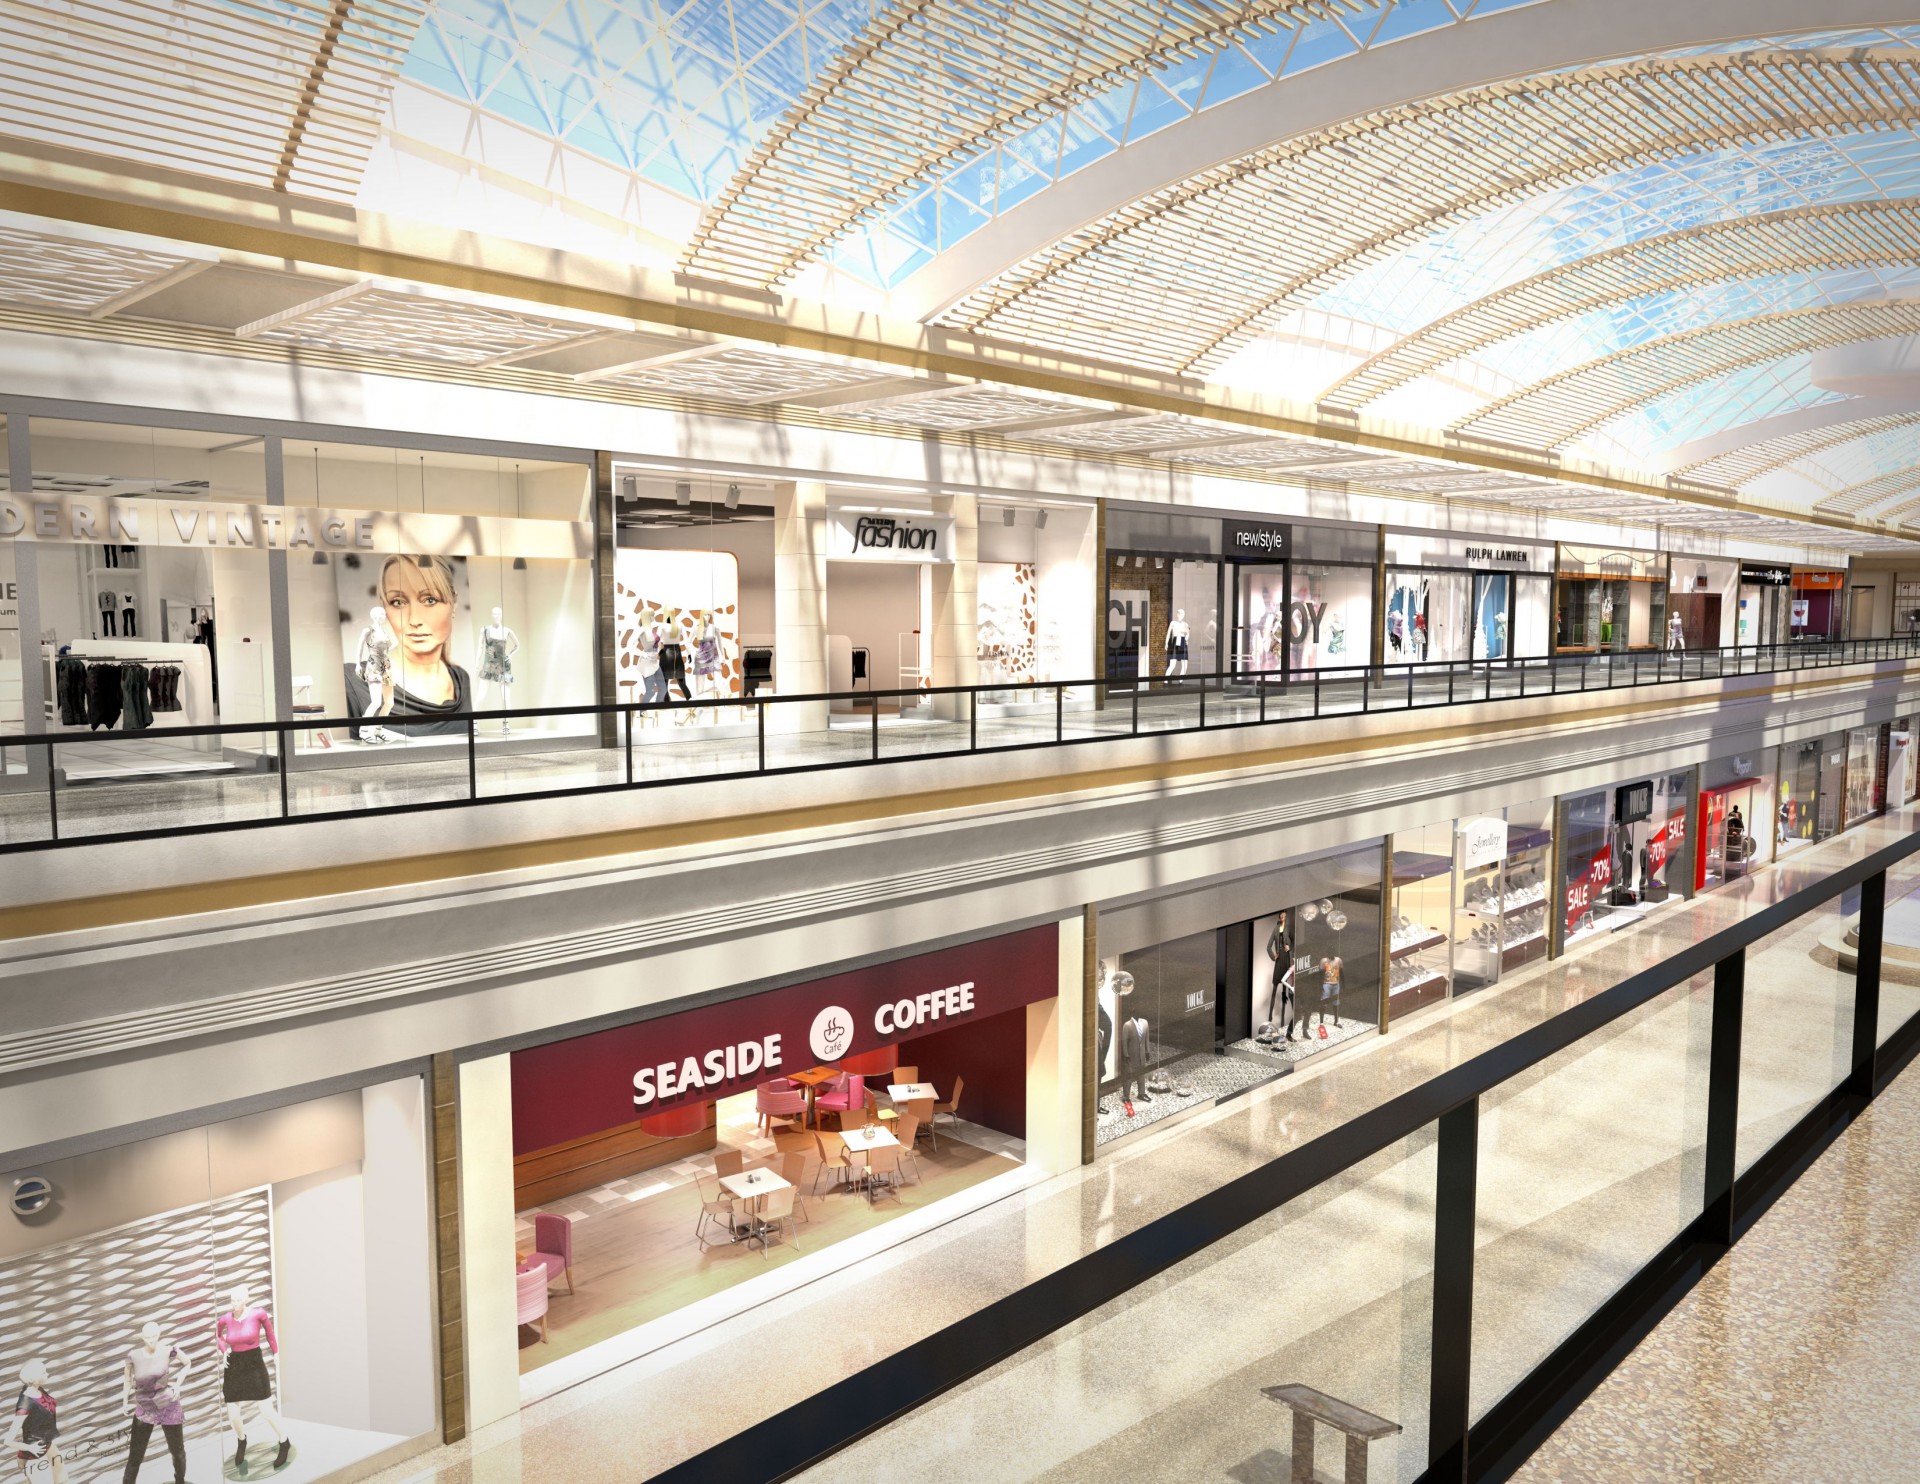 Shopping Mall Interior Animated Tour- Mall Renderings